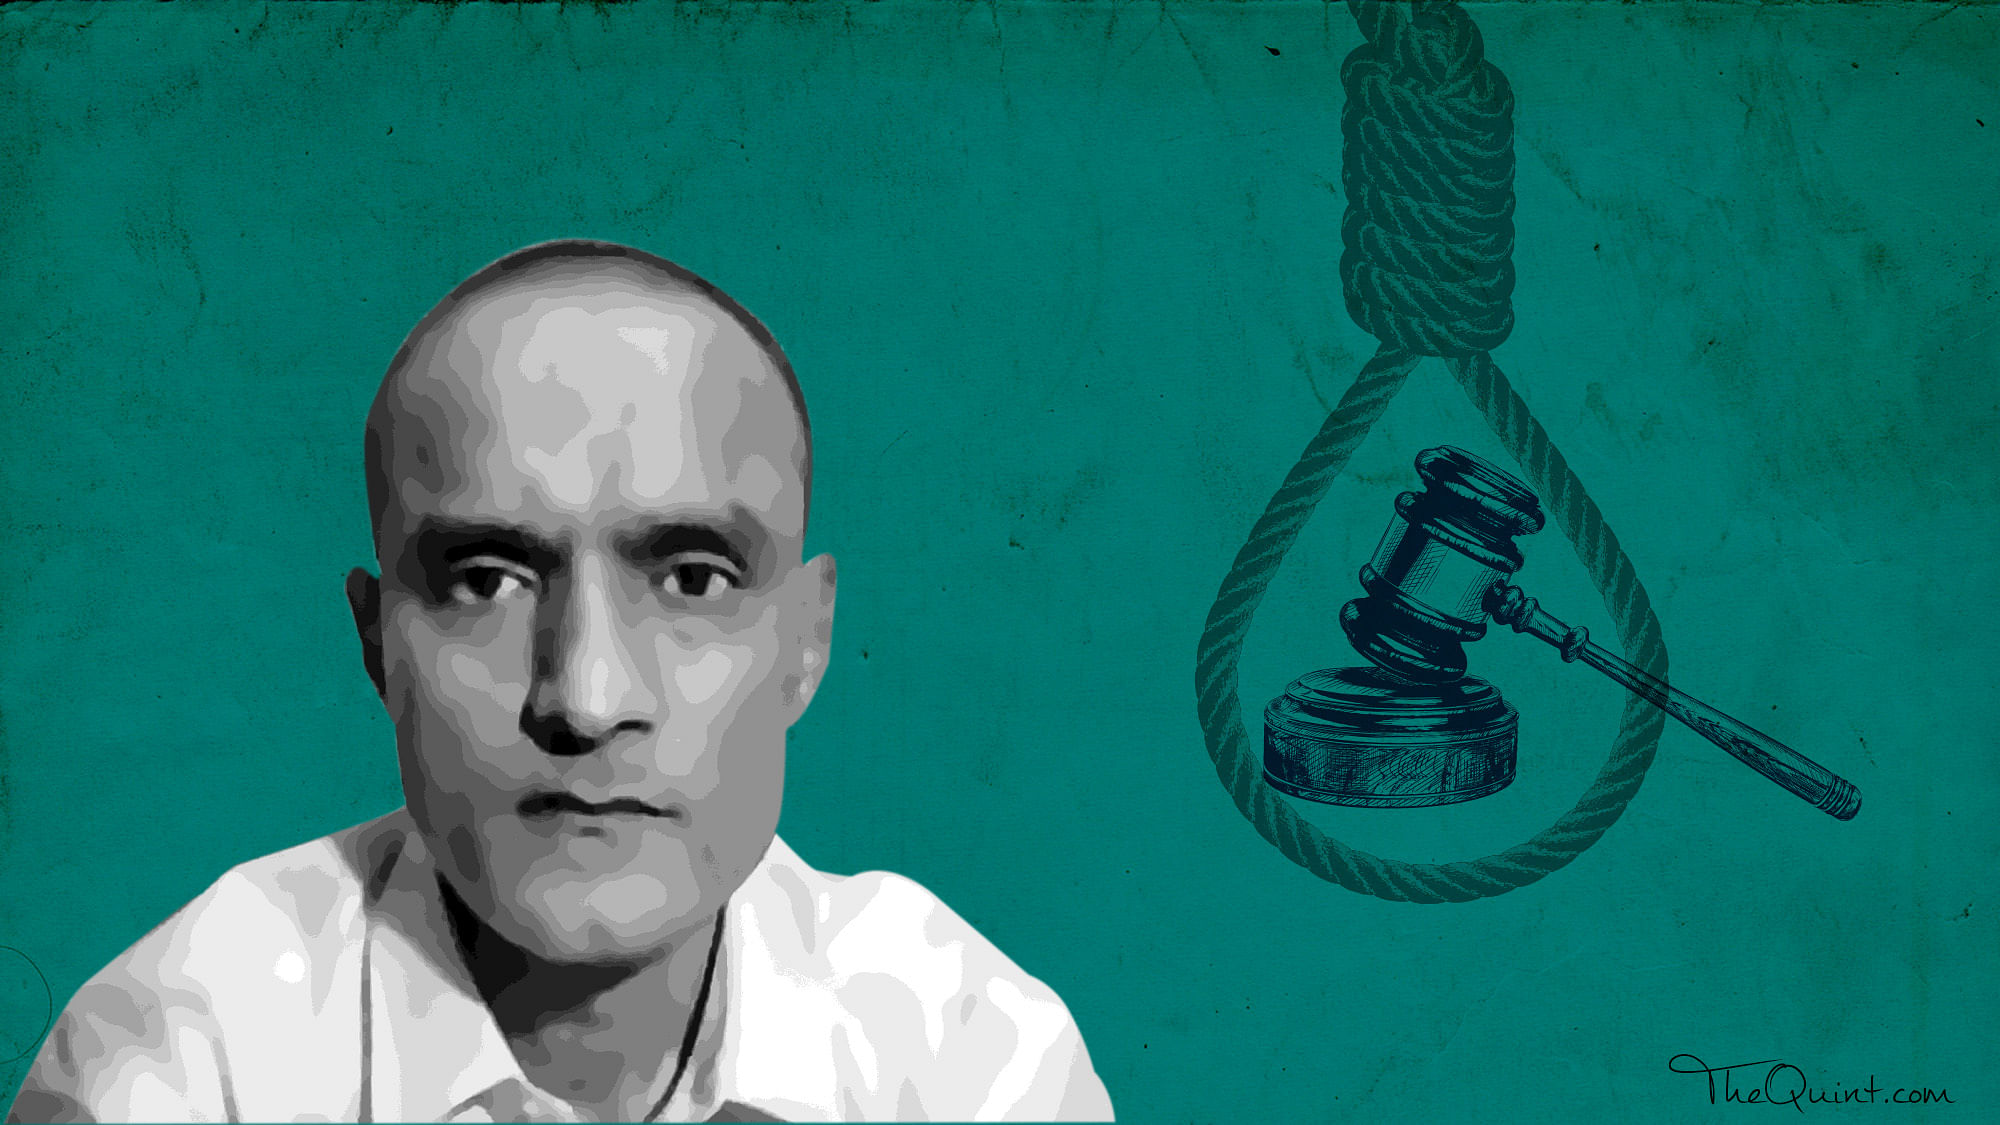 Jadhav, 49, was sentenced to death by a Pakistani military court on charges of “espionage and terrorism” in 2017.